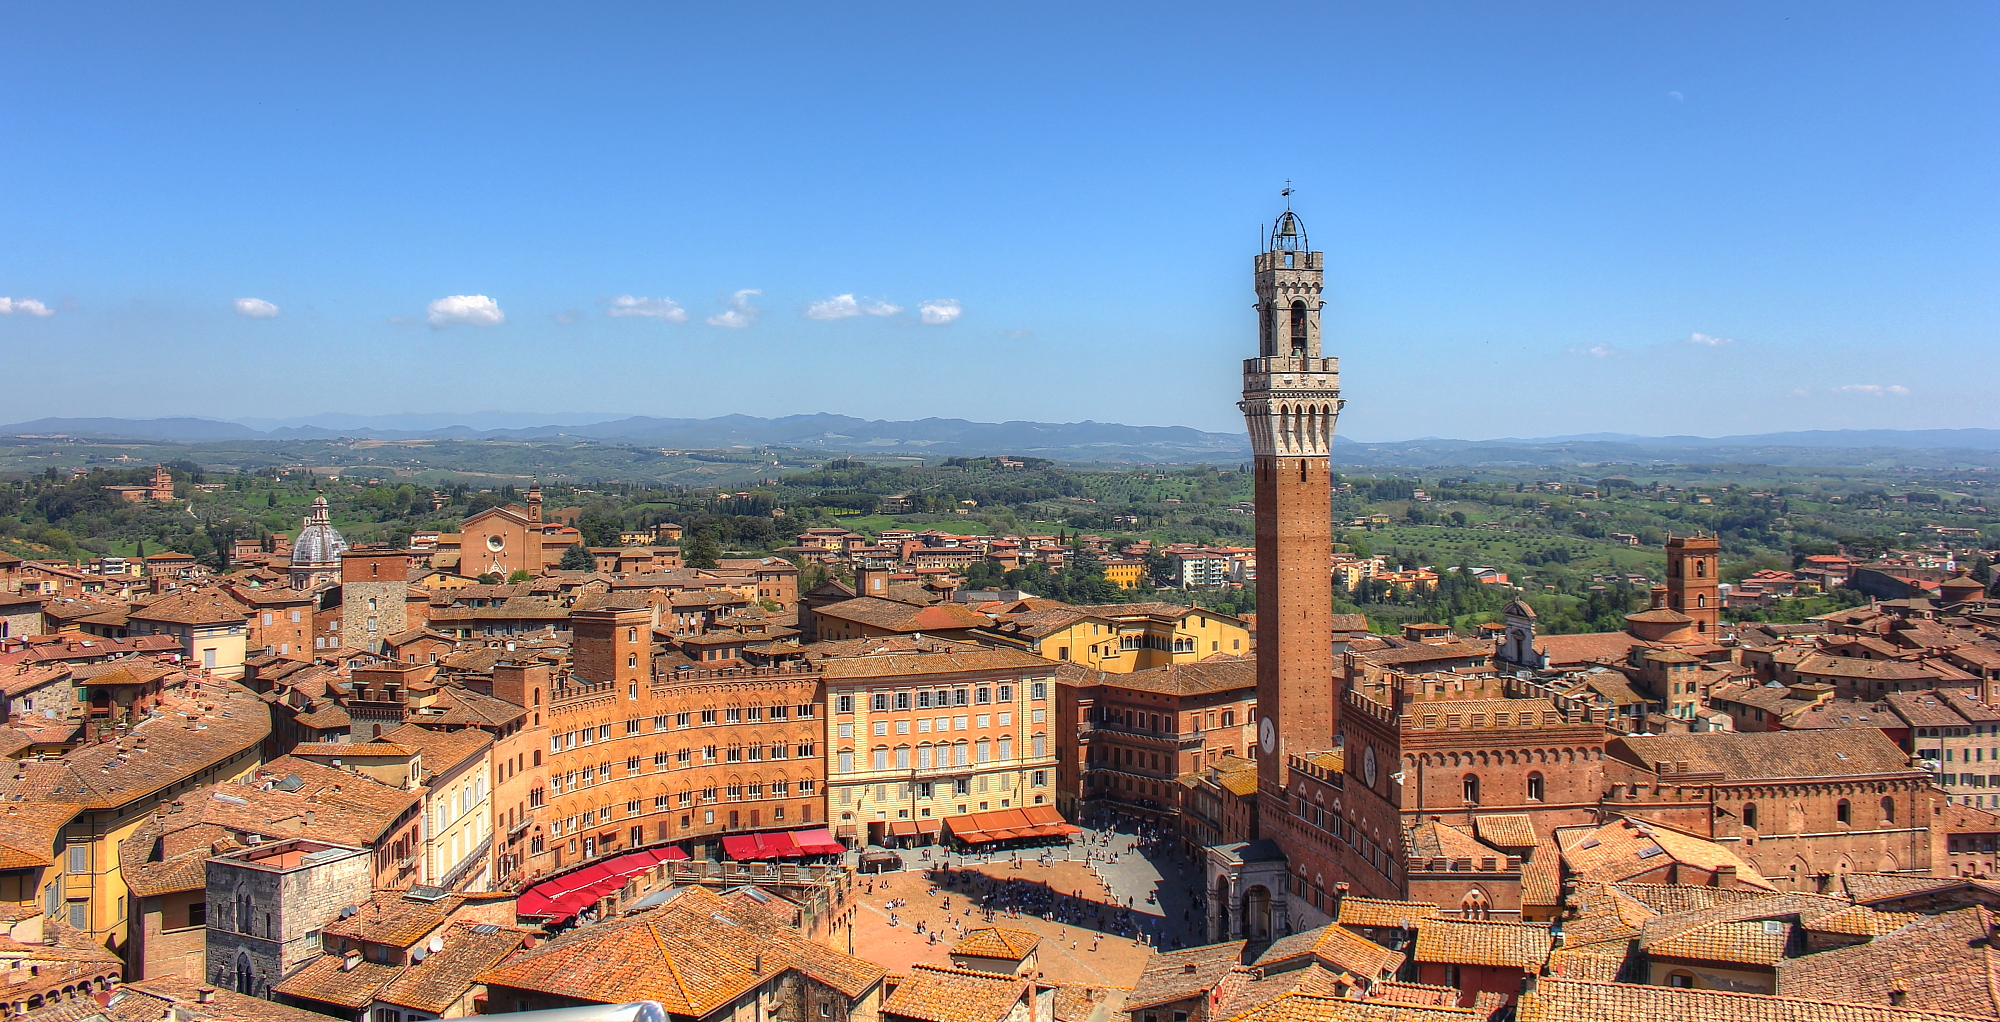 Siena - one of the must see places in Italy